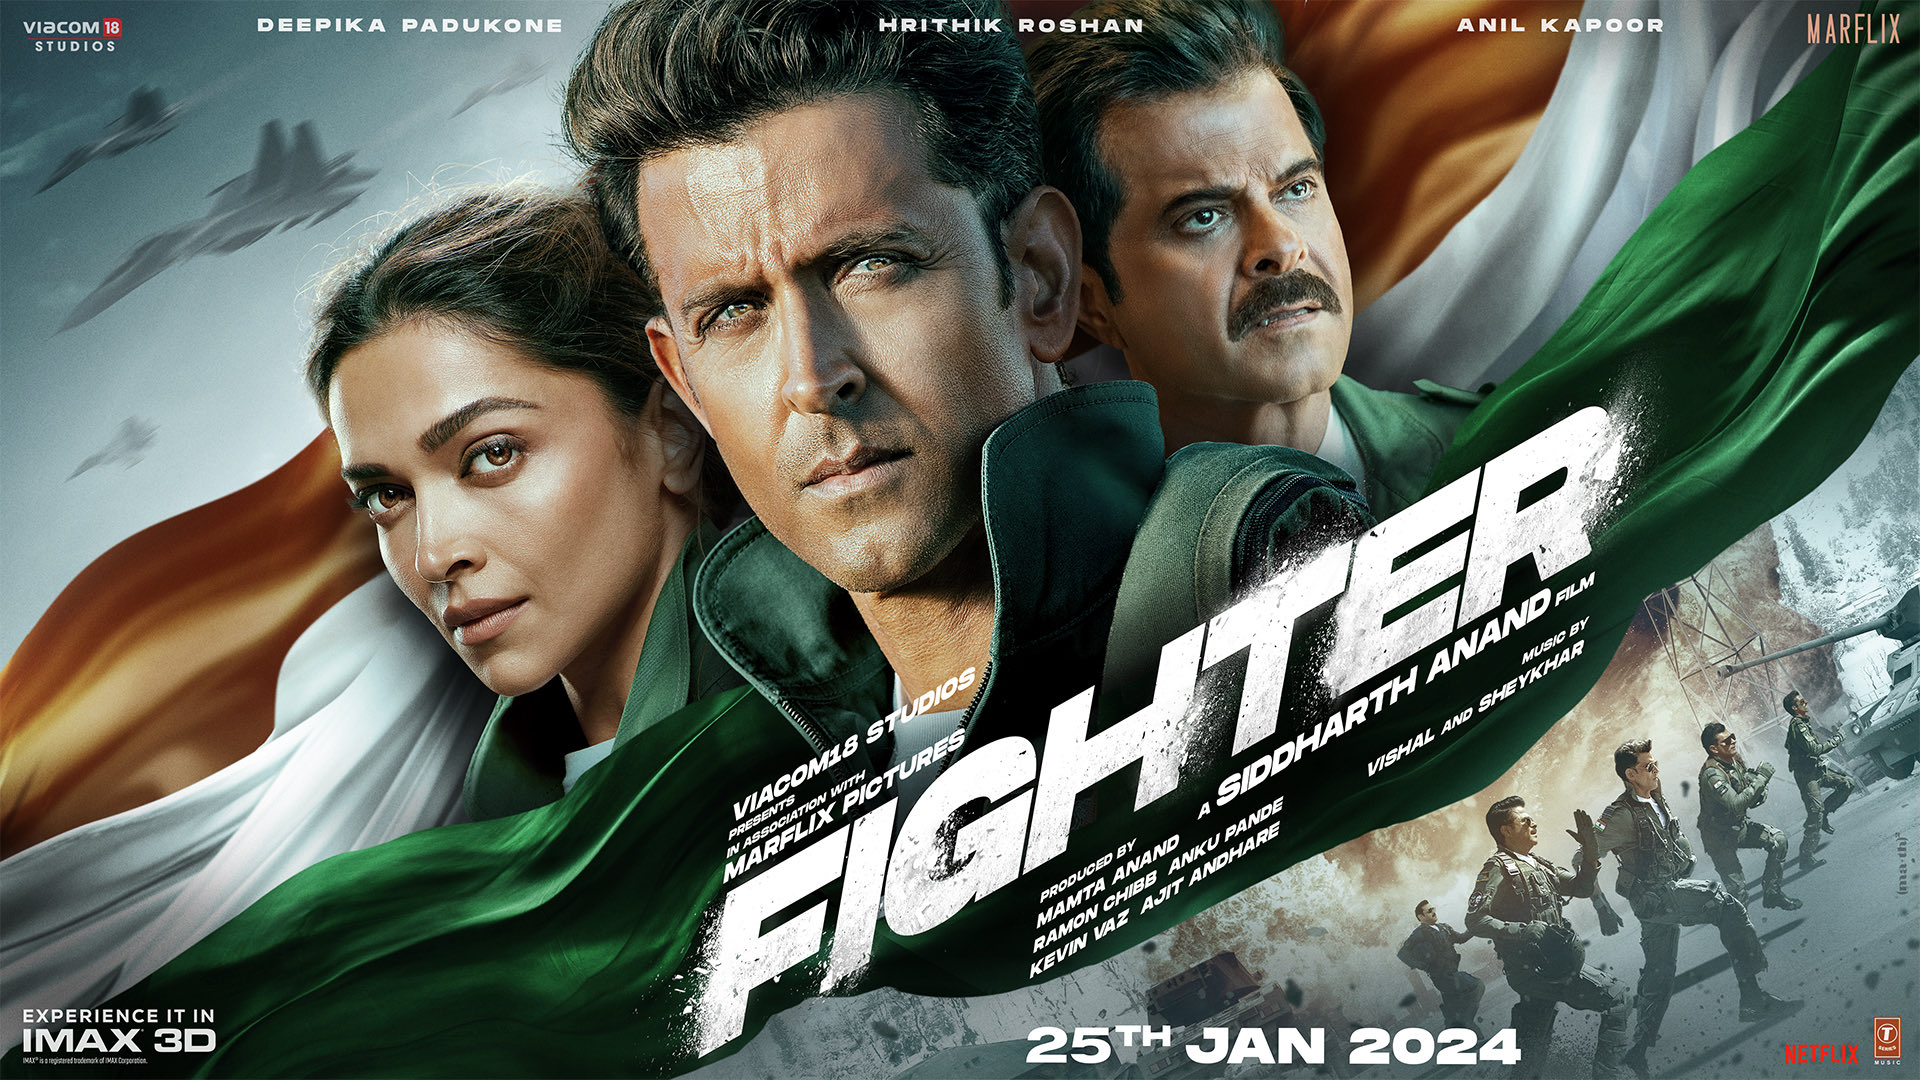 ‘Fighter’ not an easy film to make, says director Siddharth Anand